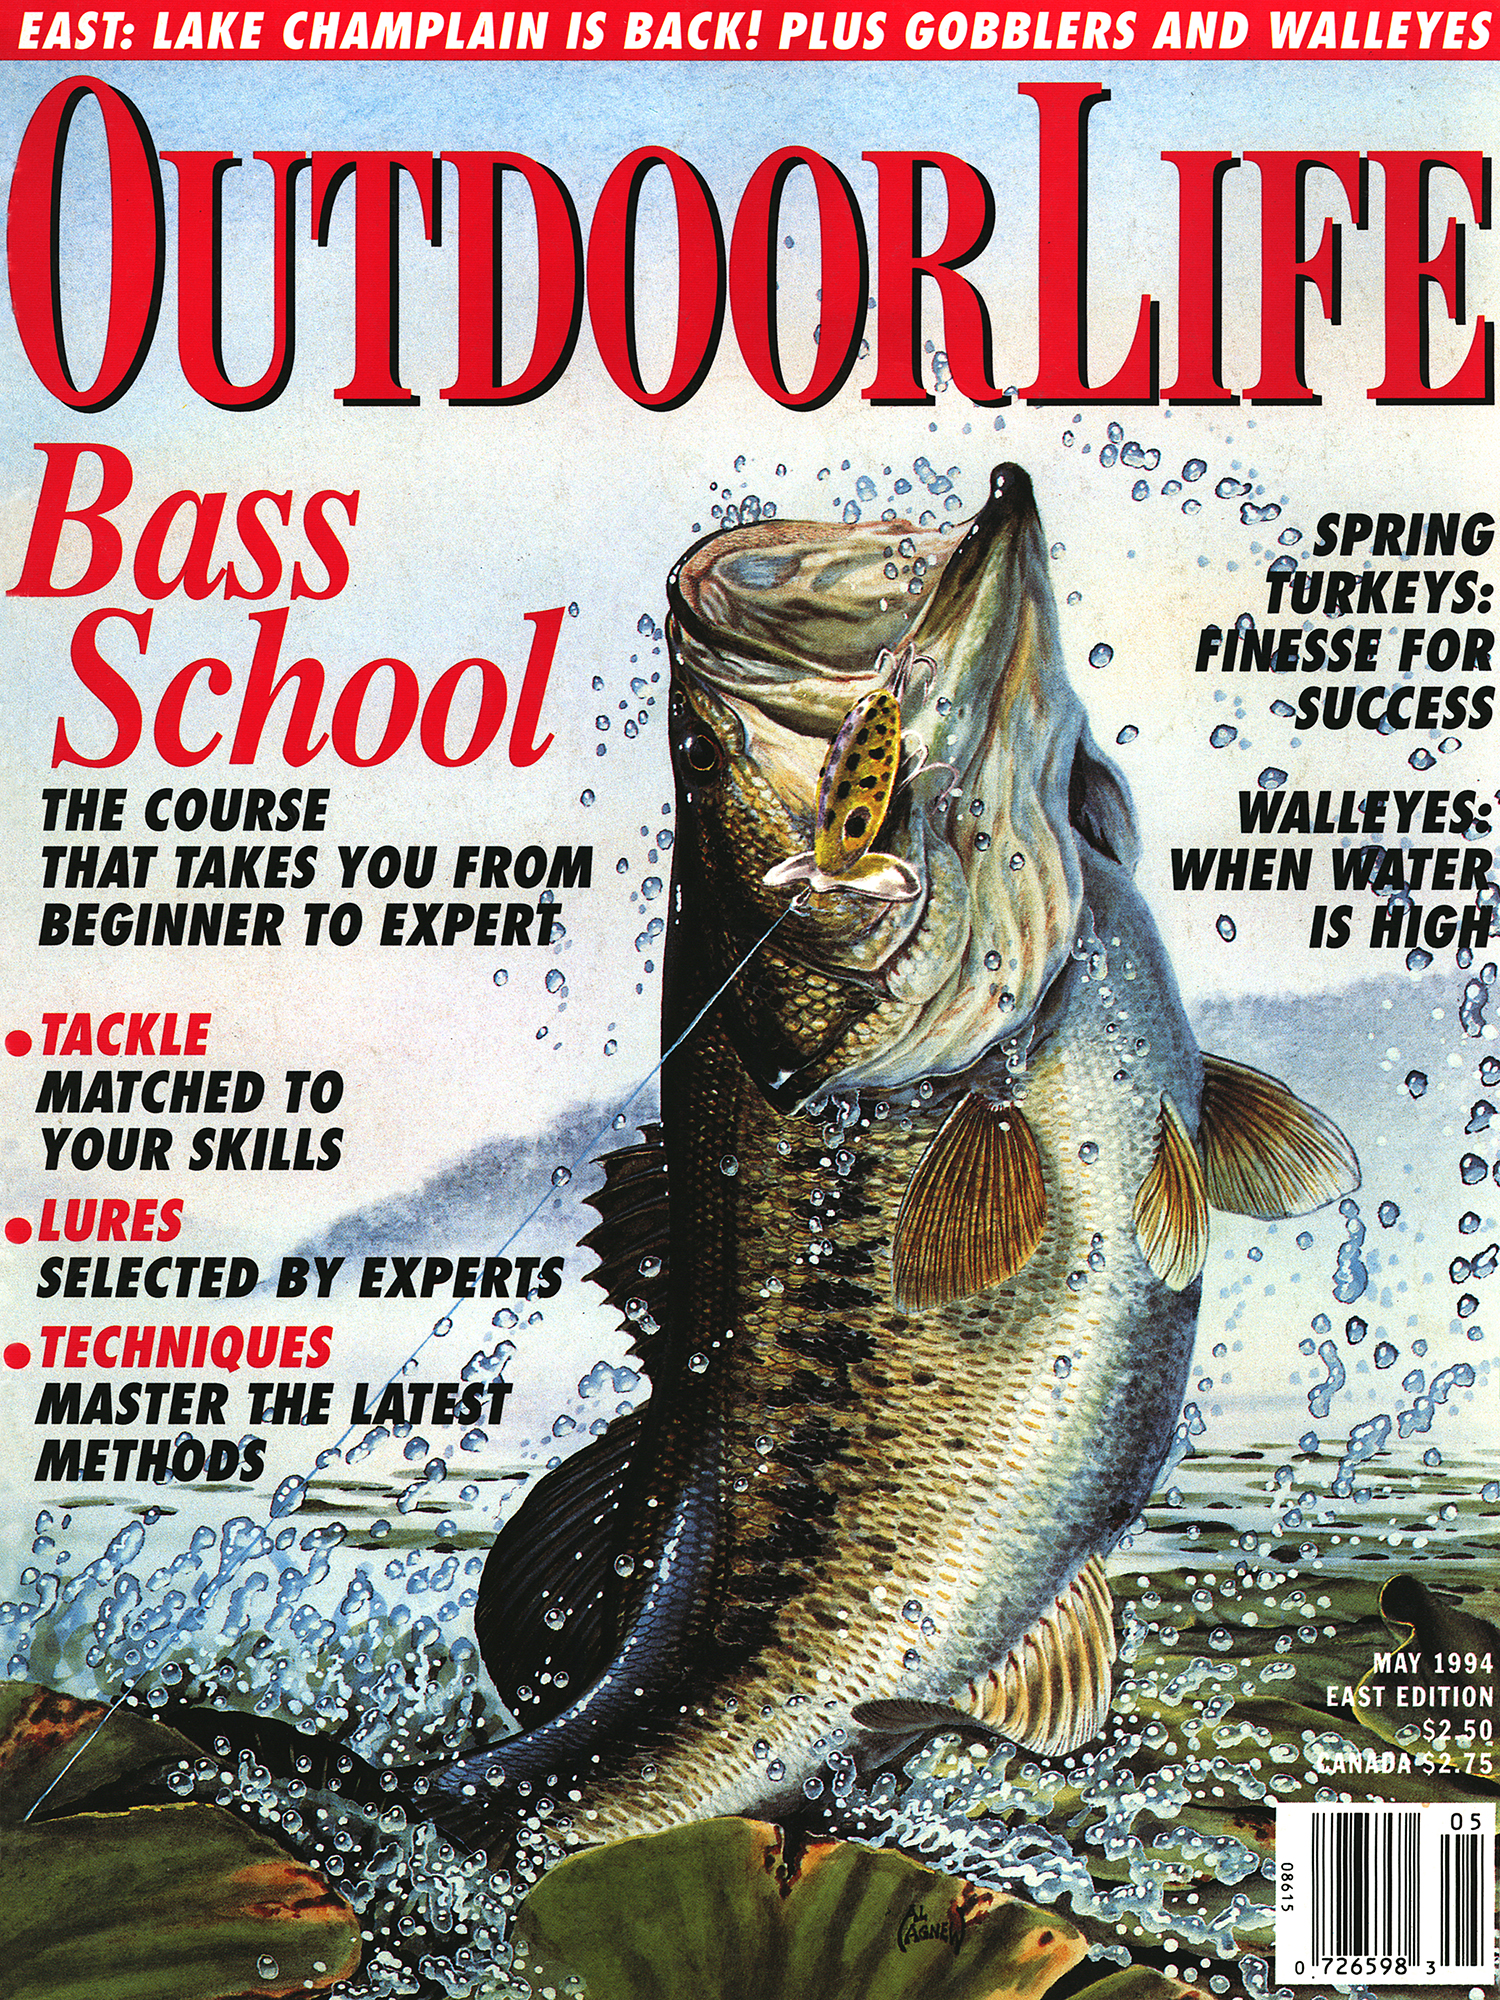 May 1994: OL published regional editions with custom covers. Subscribers in the East received this one.